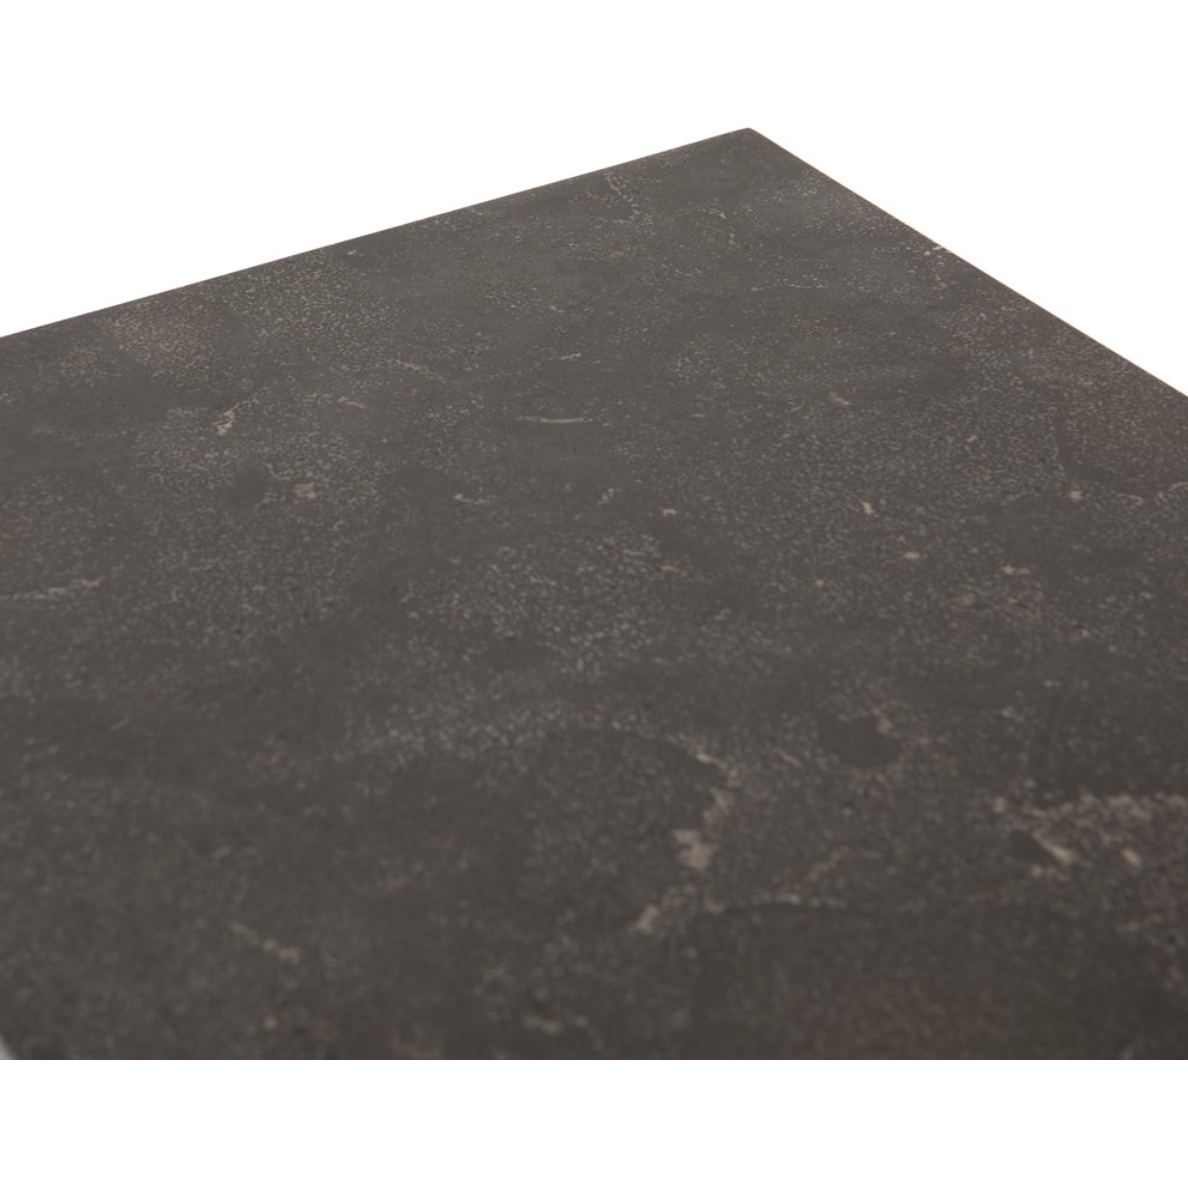 Spare beauty, casual elegance. A gunmetal Parson’s base with hand-rubbed, dimensional edges supports a rough-hewn bluestone slab that feels found and perfectly placed.  Dimensions: 60"w x 17"d x 32"h Materials: Iron, Bluestone Colors: Gunmetal, Bluestone